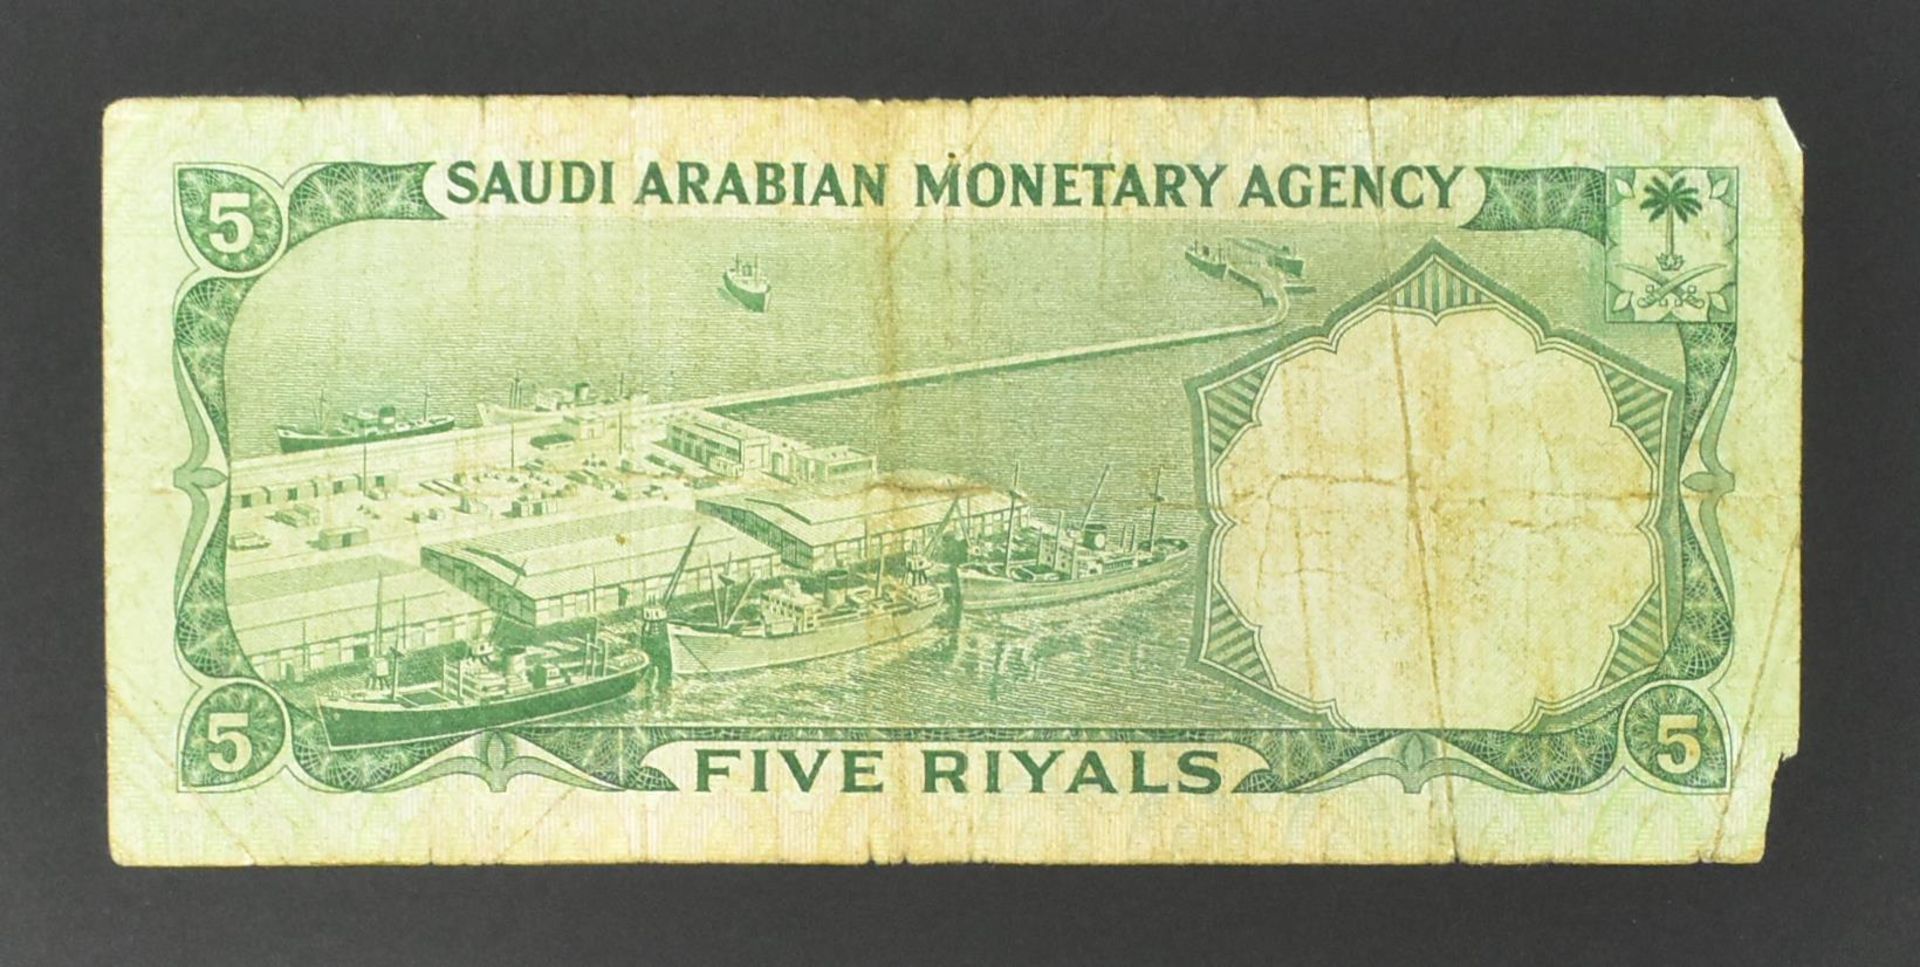 COLLECTION OF INTERNATIONAL UNCIRCULATED BANK NOTES - OMAN - Image 28 of 51